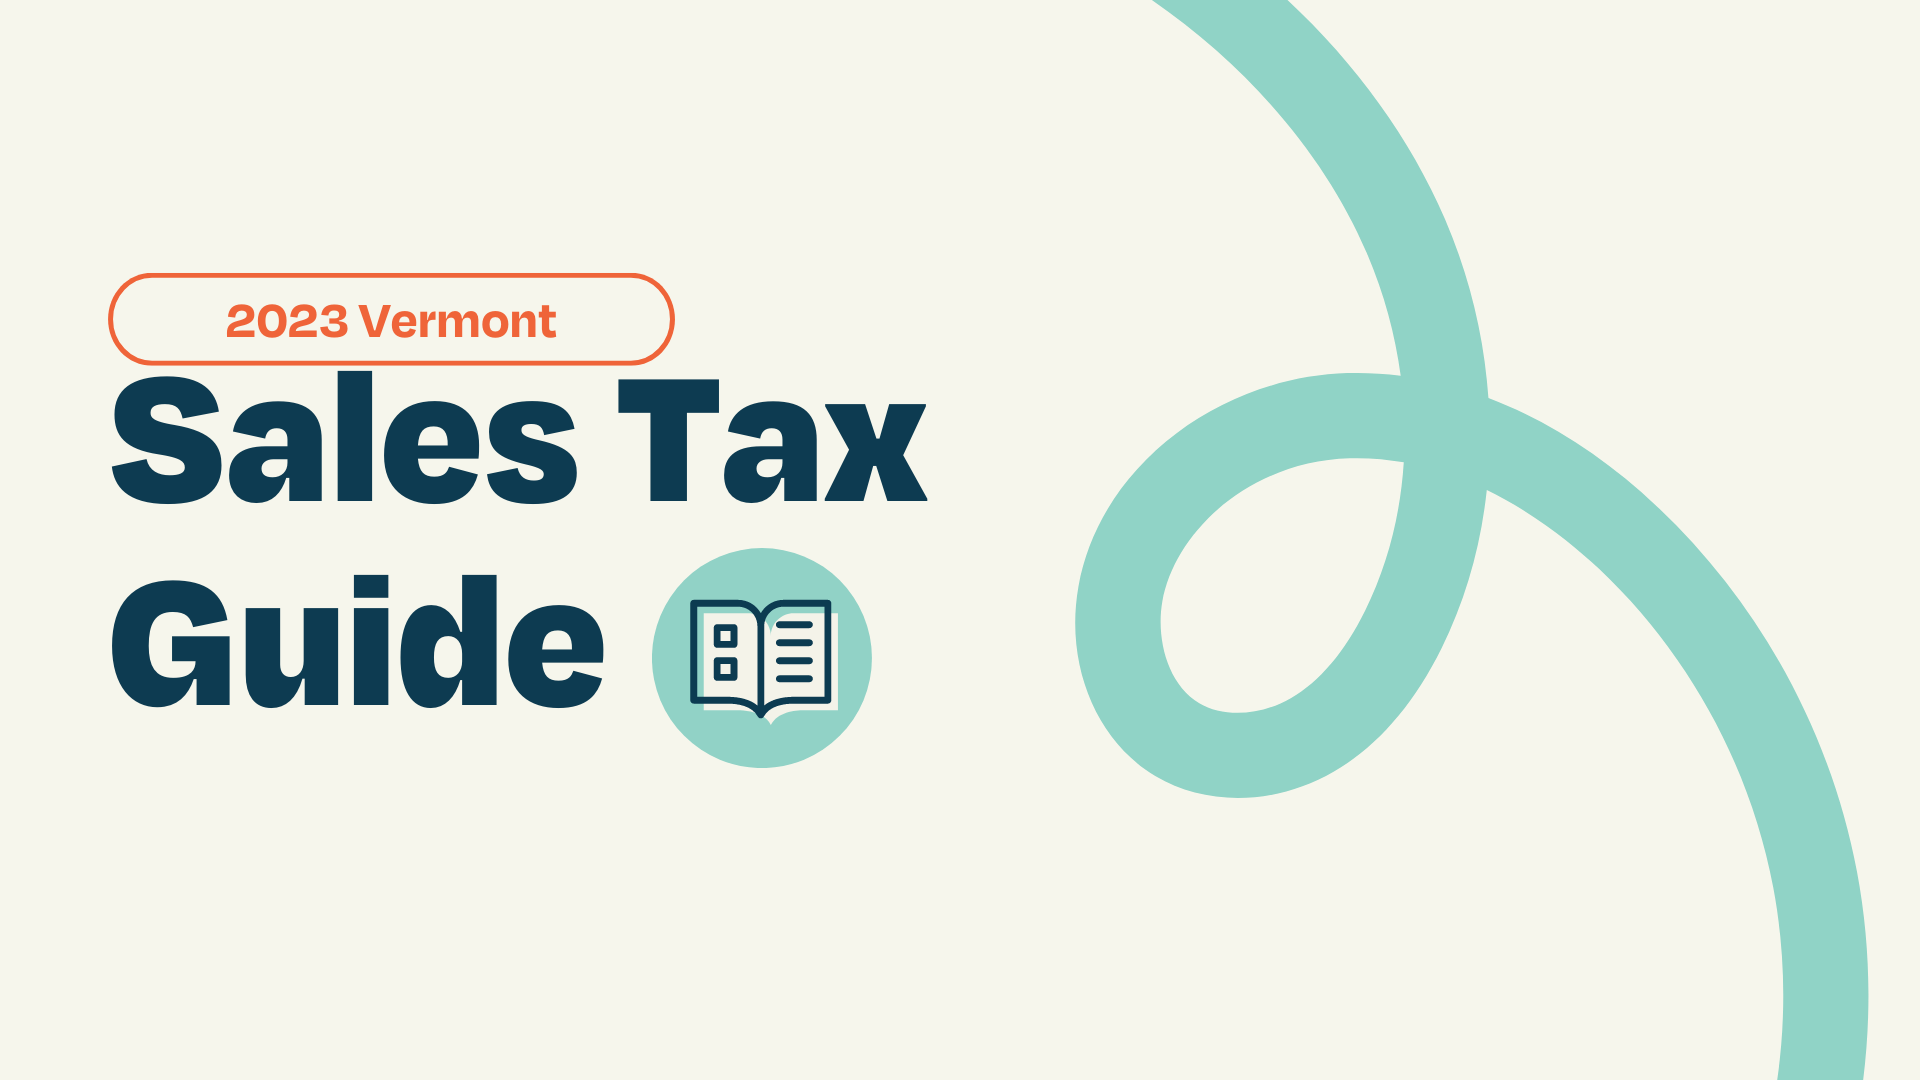 Vermont 2023 Sales Tax Guide